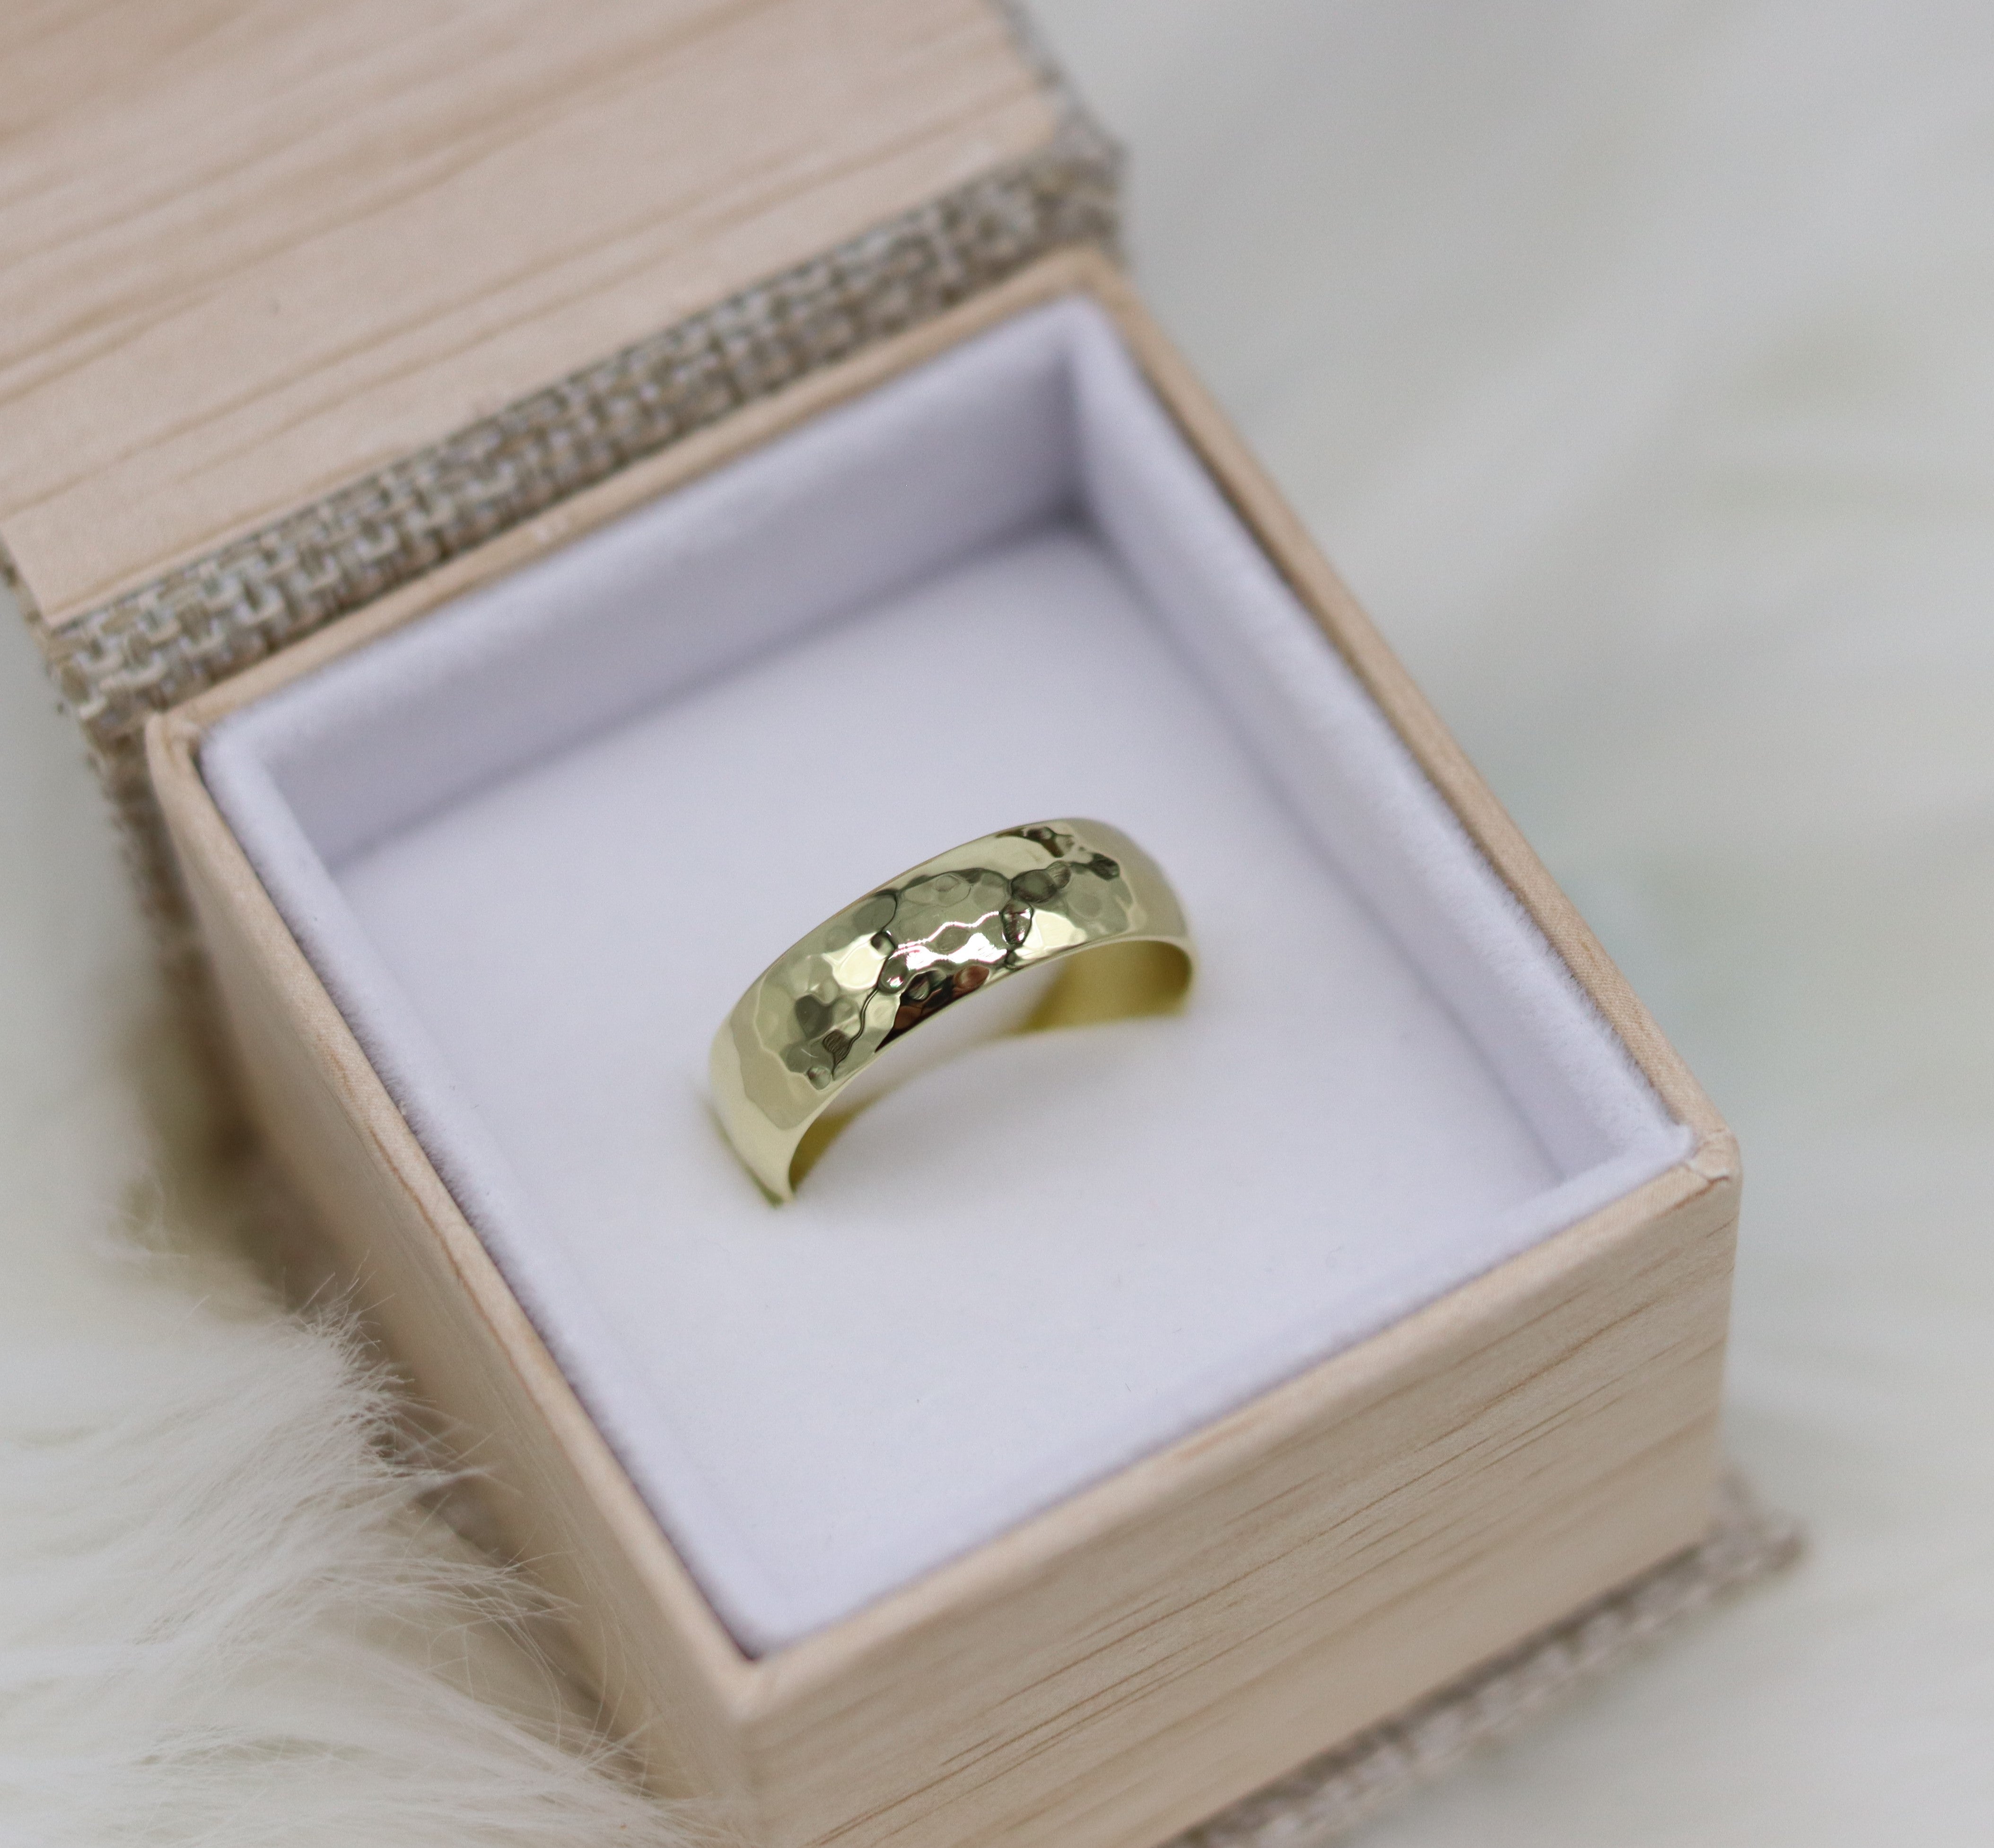 How Much Is a Gold Wedding Ring Worth? — Reclaim, Recycle, and Sell your  Precious Metal Scrap